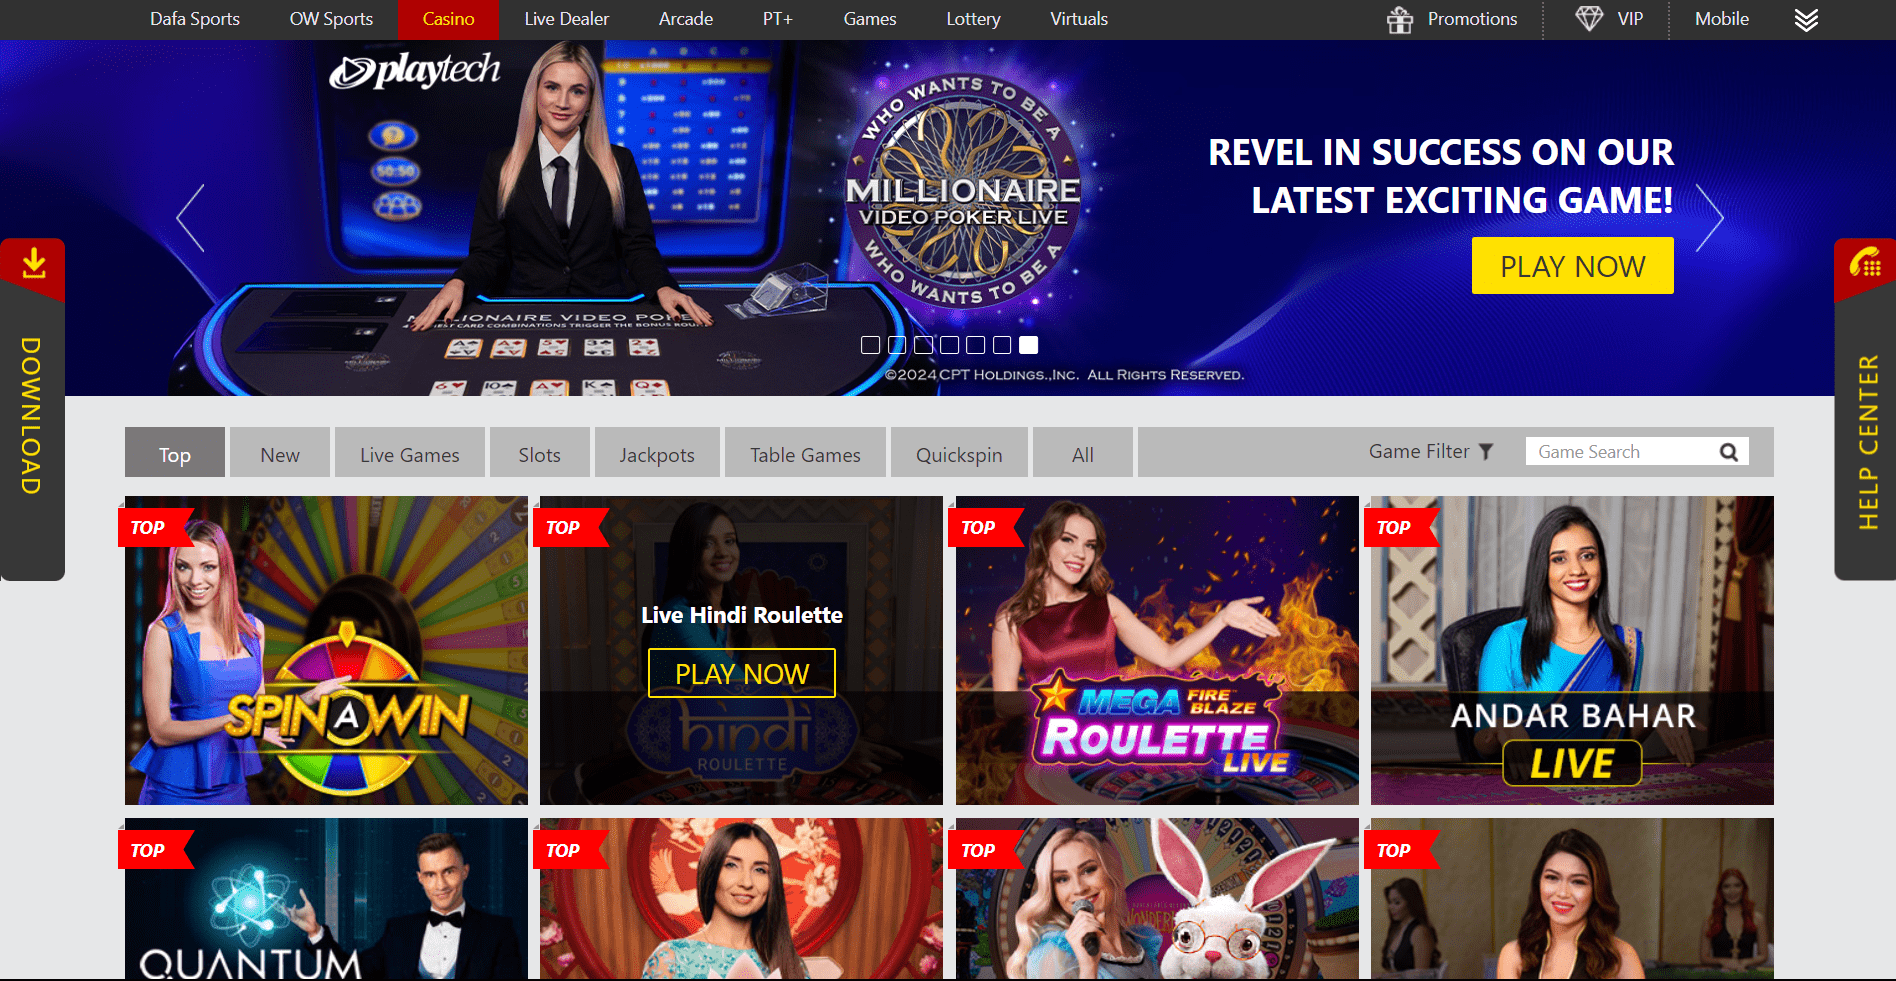 An image of the Dafabet Casino games